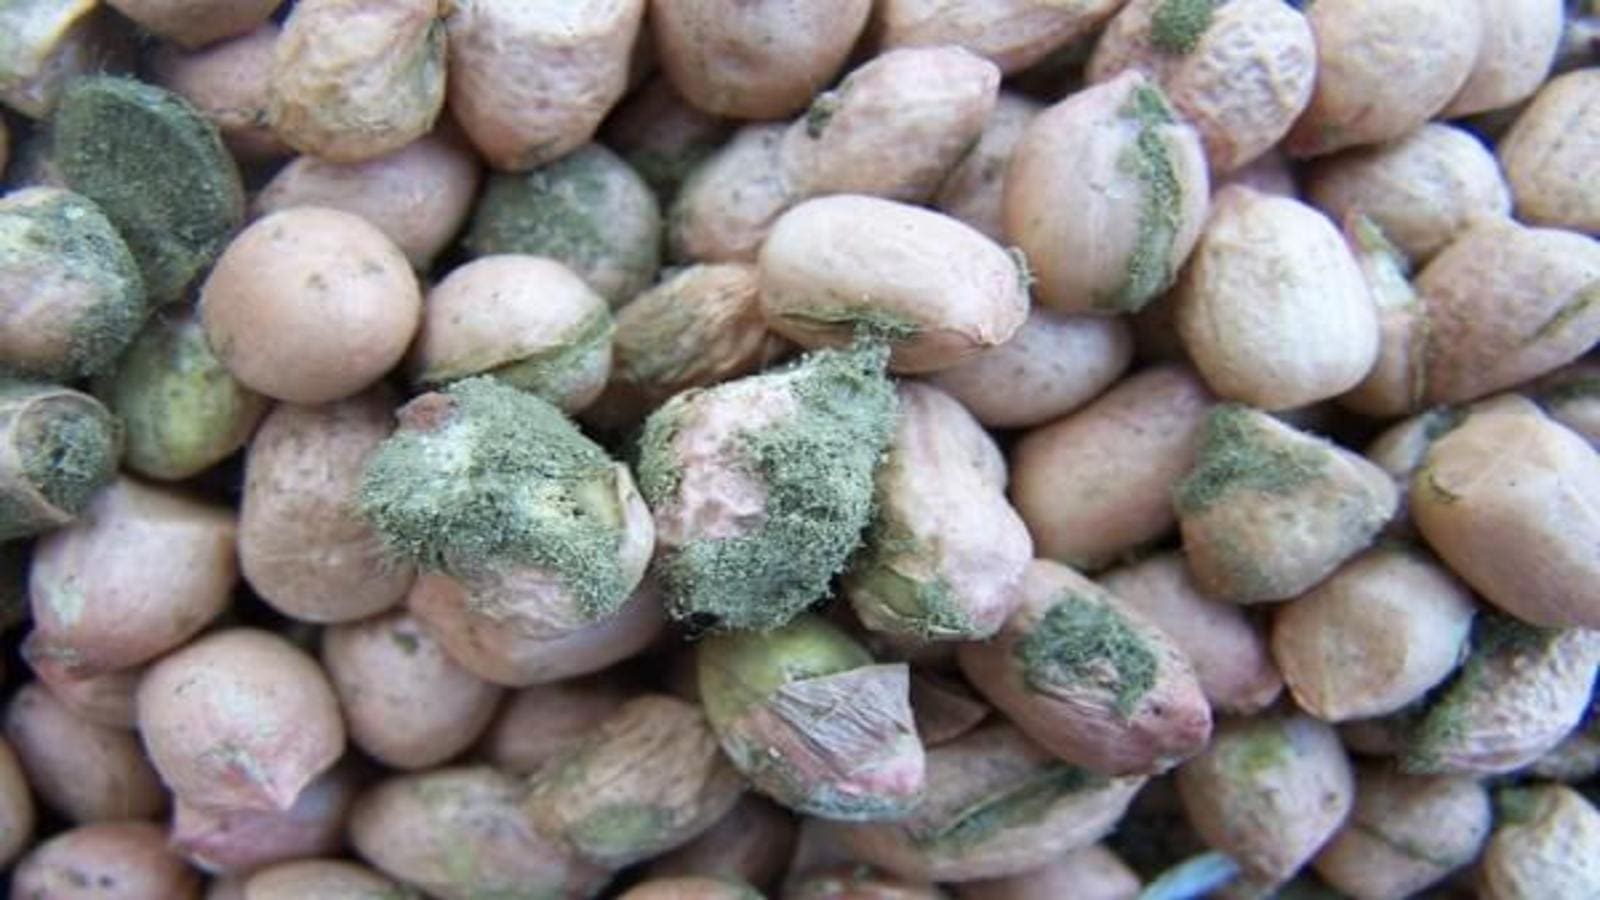 Nigeria’s Ministry of Agriculture reaffirms commitment to tackle Aflatoxin menace